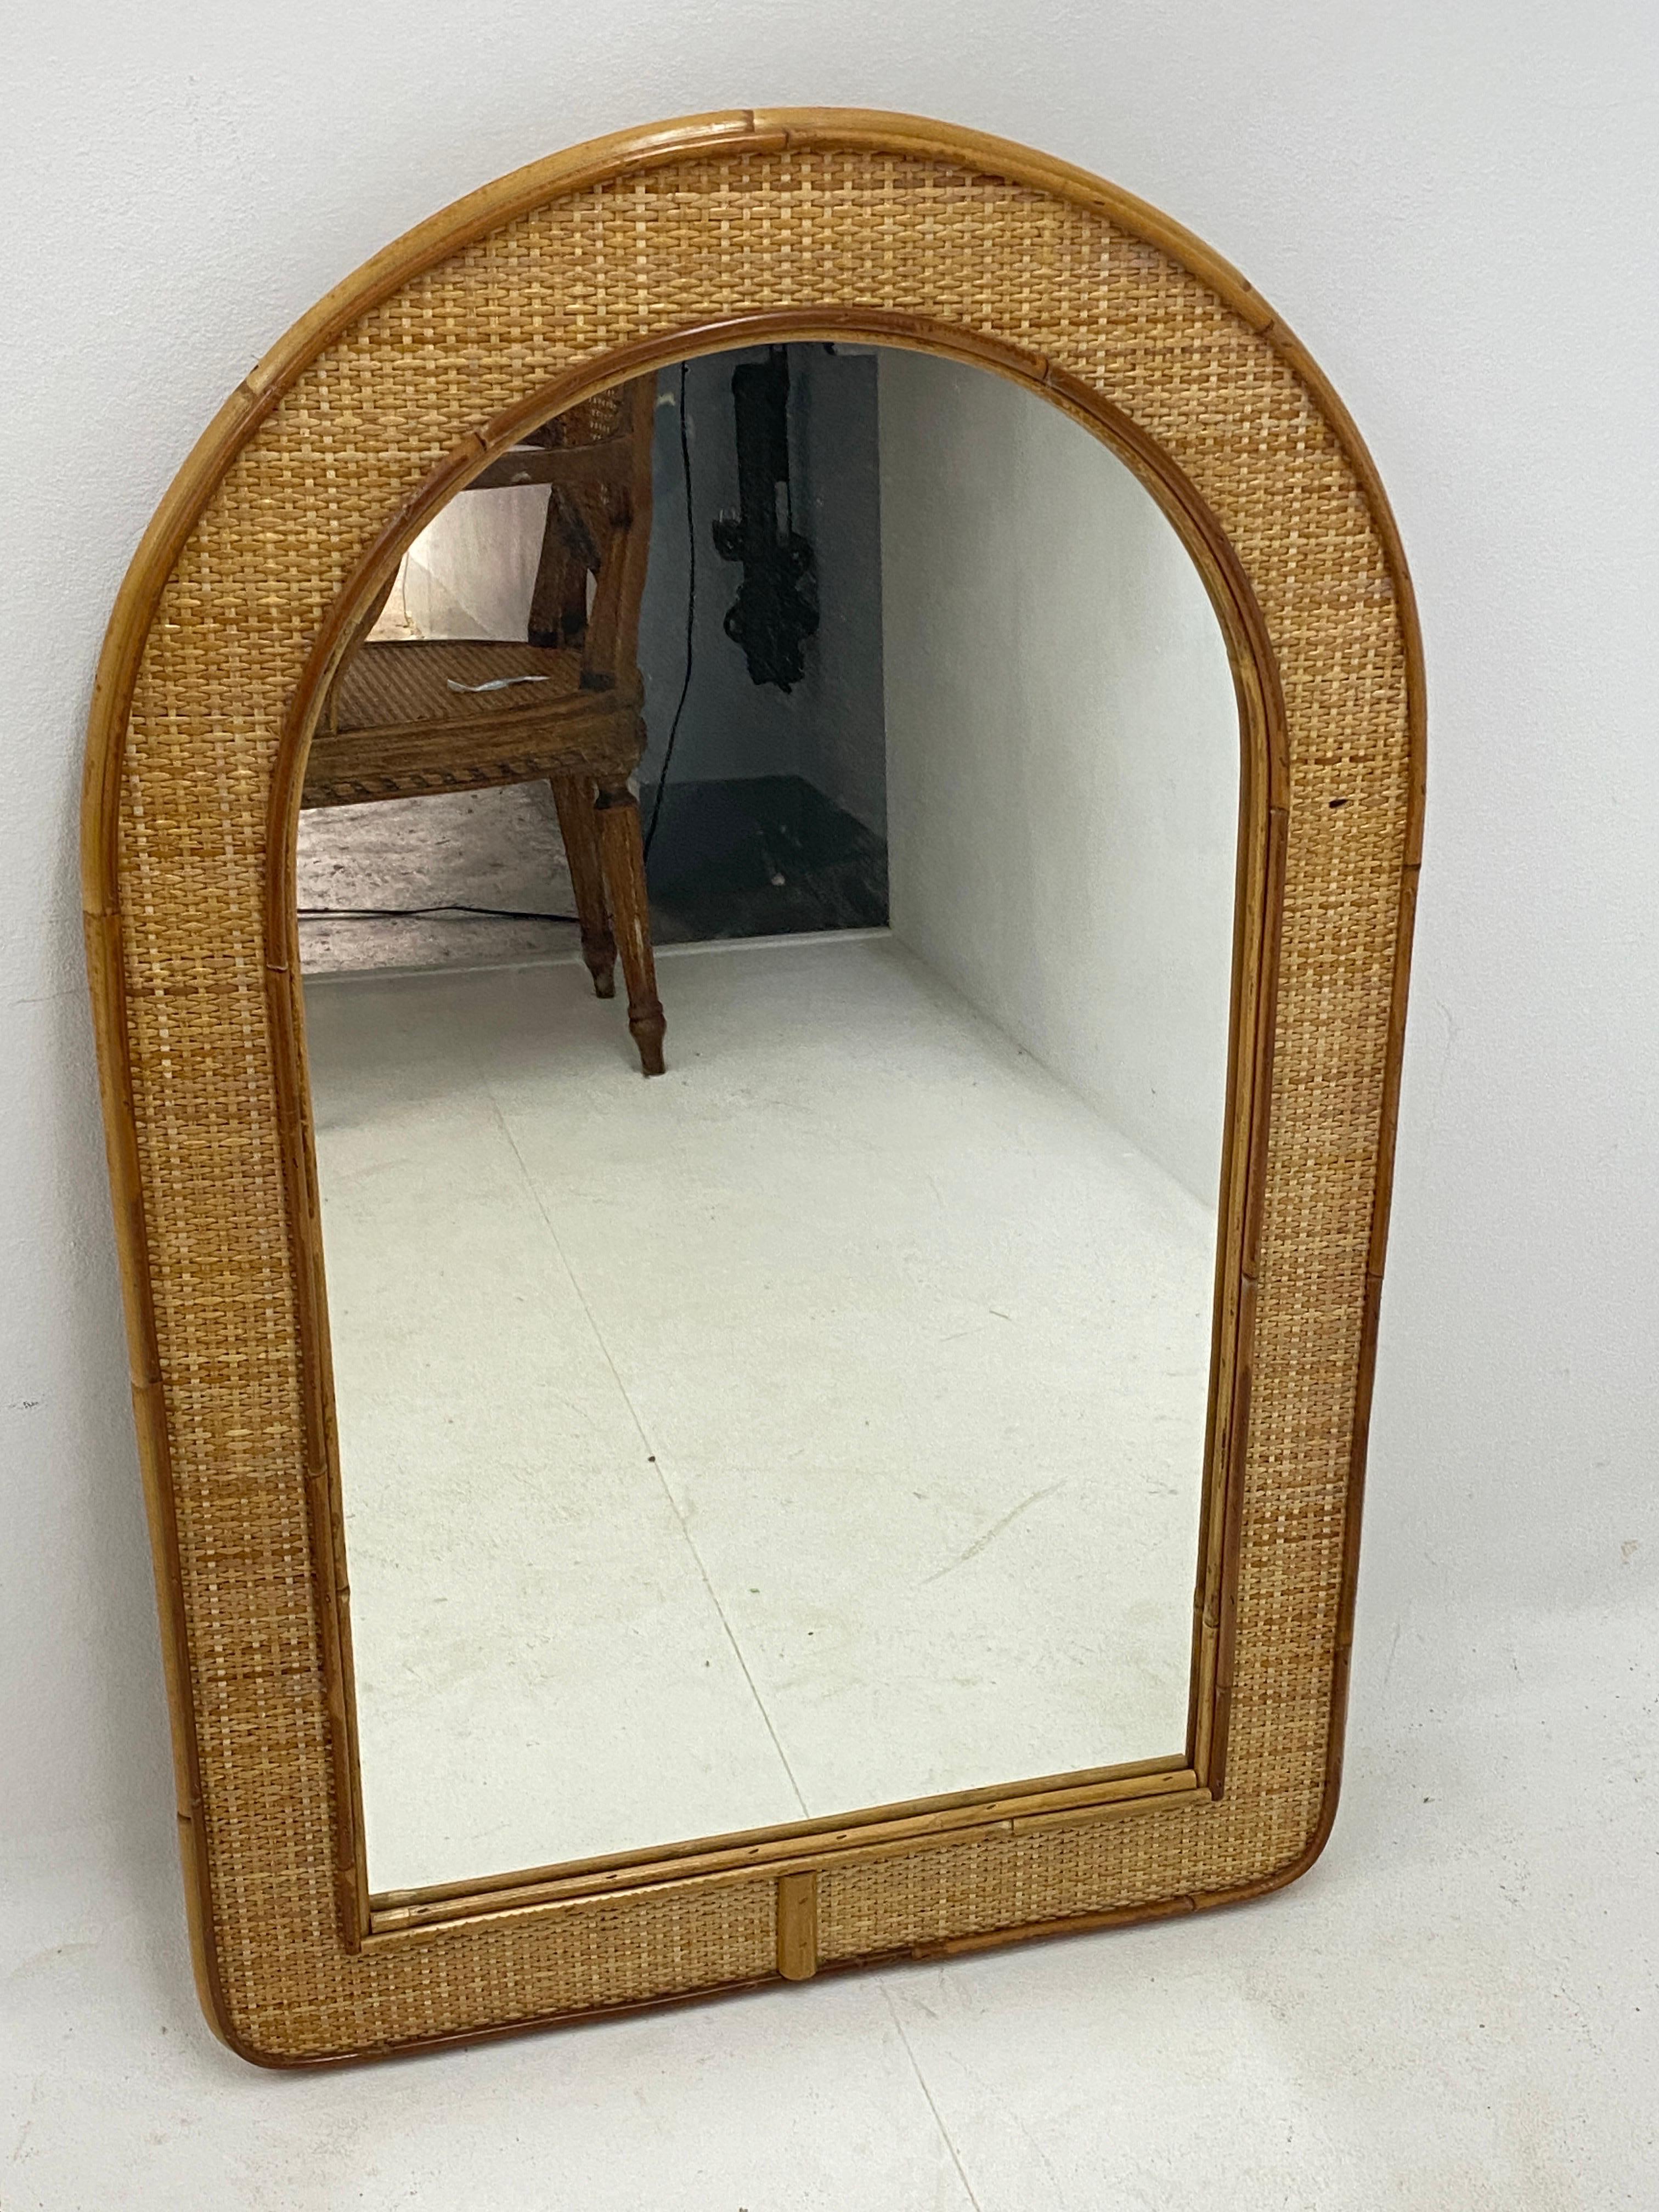 This is a bamboo and rattan mirror. Made in Italy circa 1970. The color is brown.
Midcentury wall mirror features a veneer of parquetry in a herringbone pattern and faux bamboo detailing. Good condition with only very minor imperfections consistent